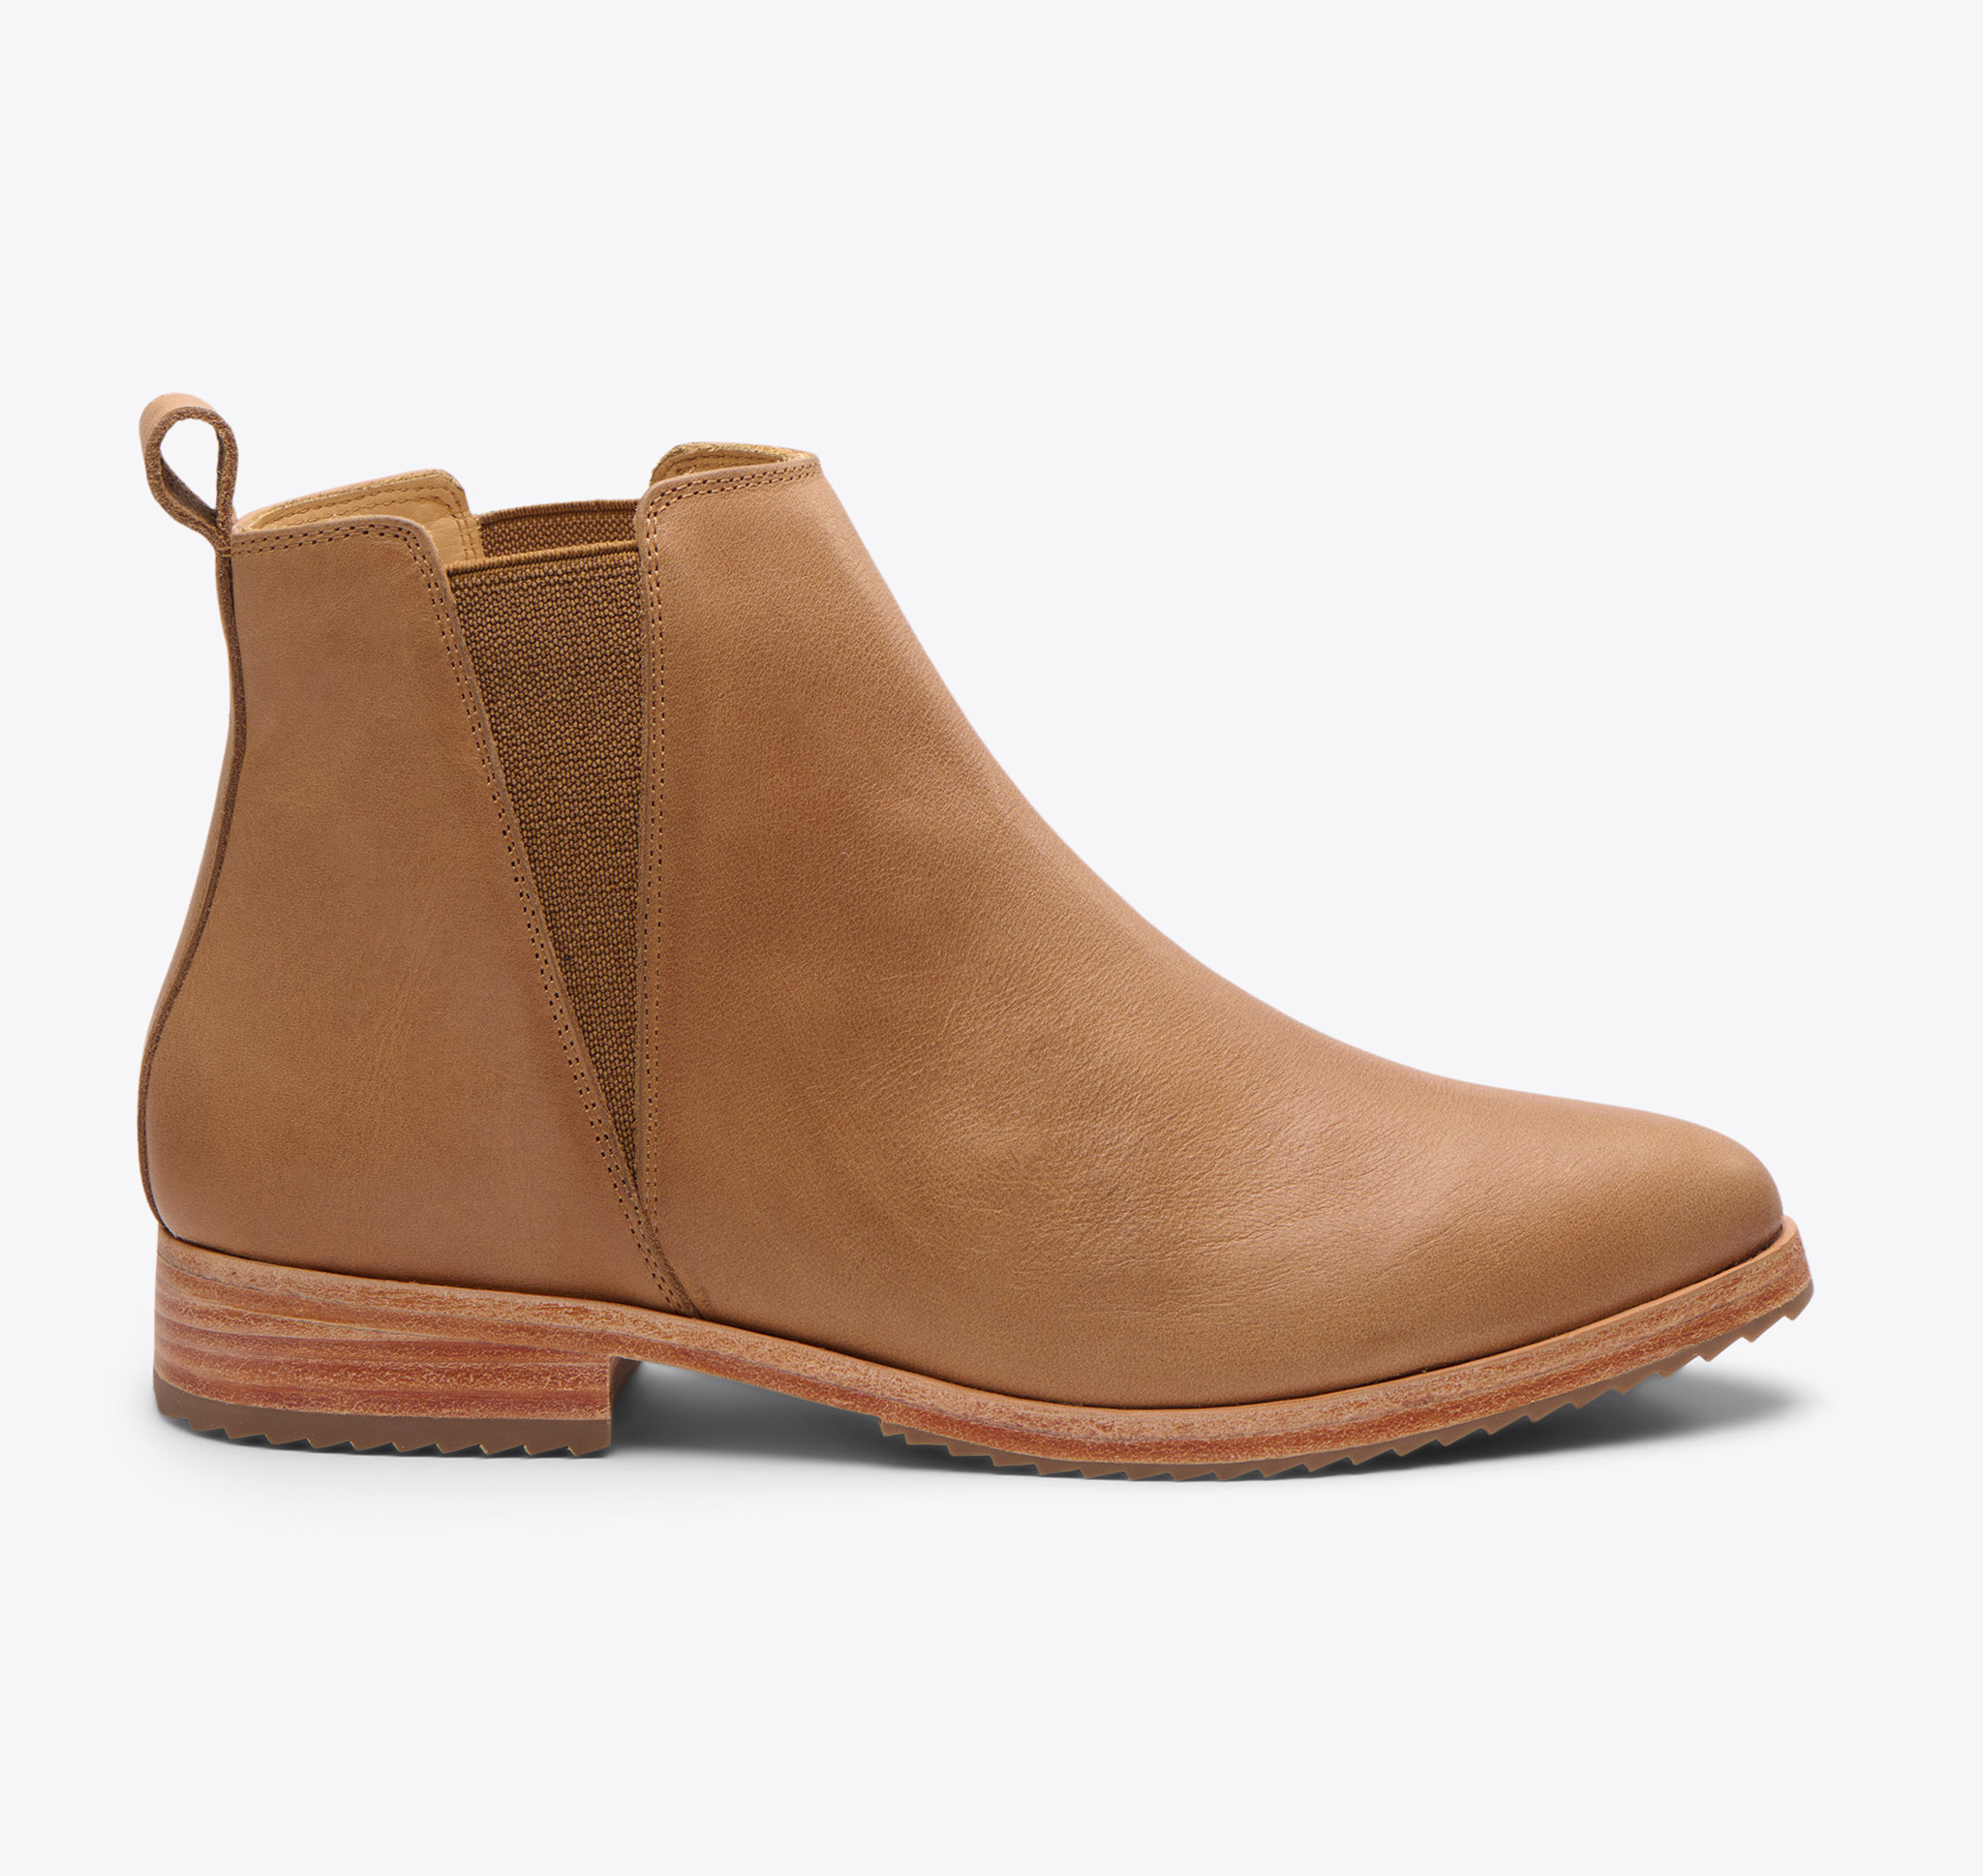 Nisolo Classic Chelsea Boot Almond - Every Nisolo product is built on the foundation of comfort, function, and design. 